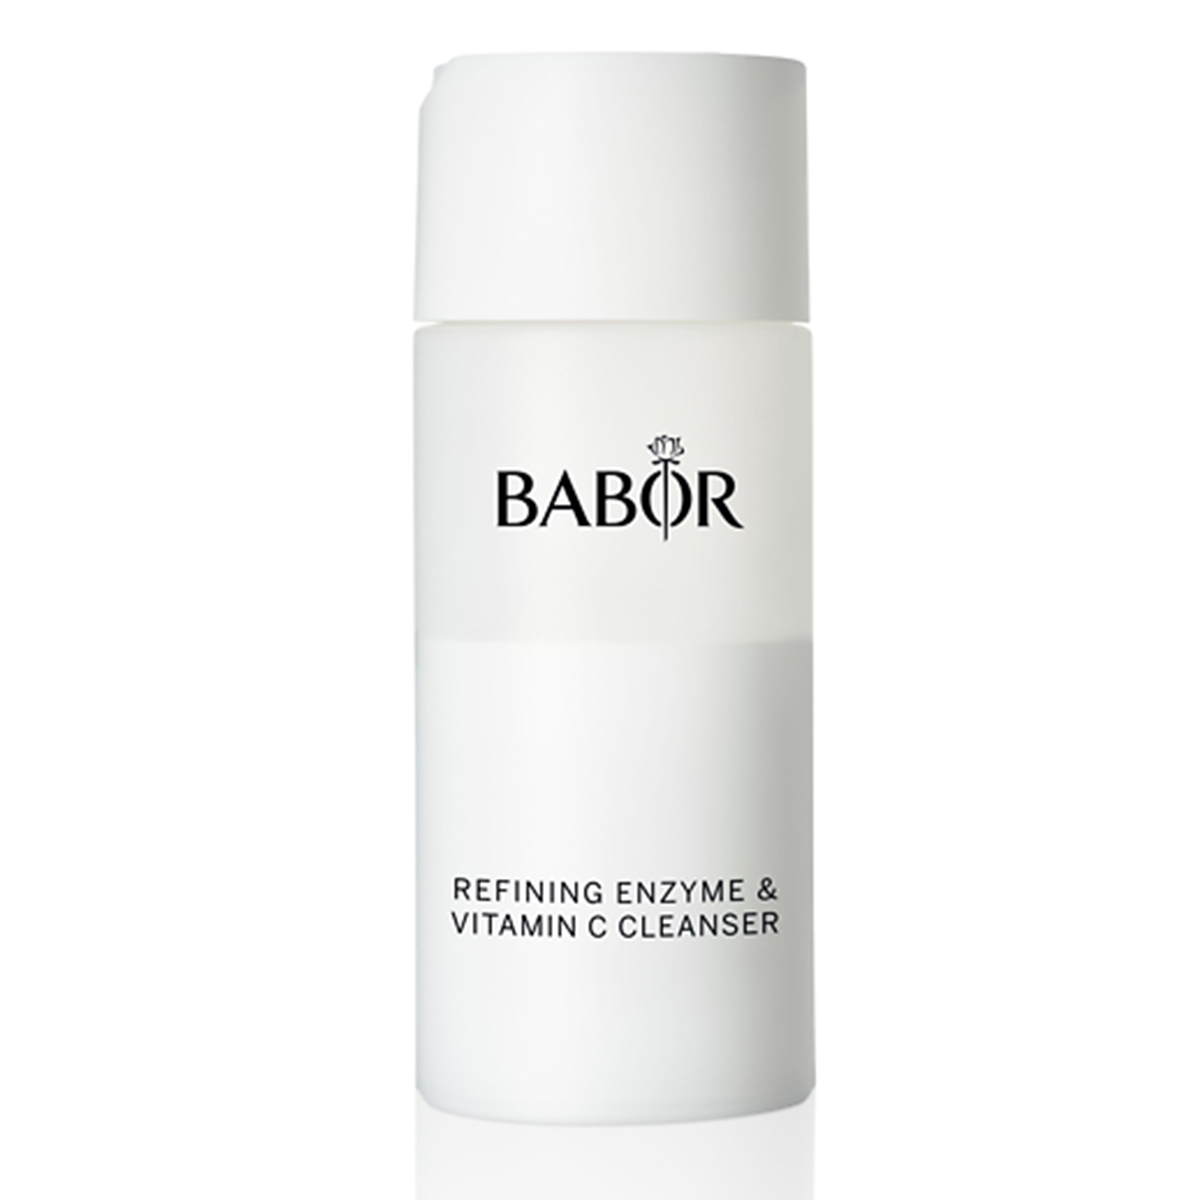 BABOR Refining Enzyme & Vitamin C Cleanser, 40 g